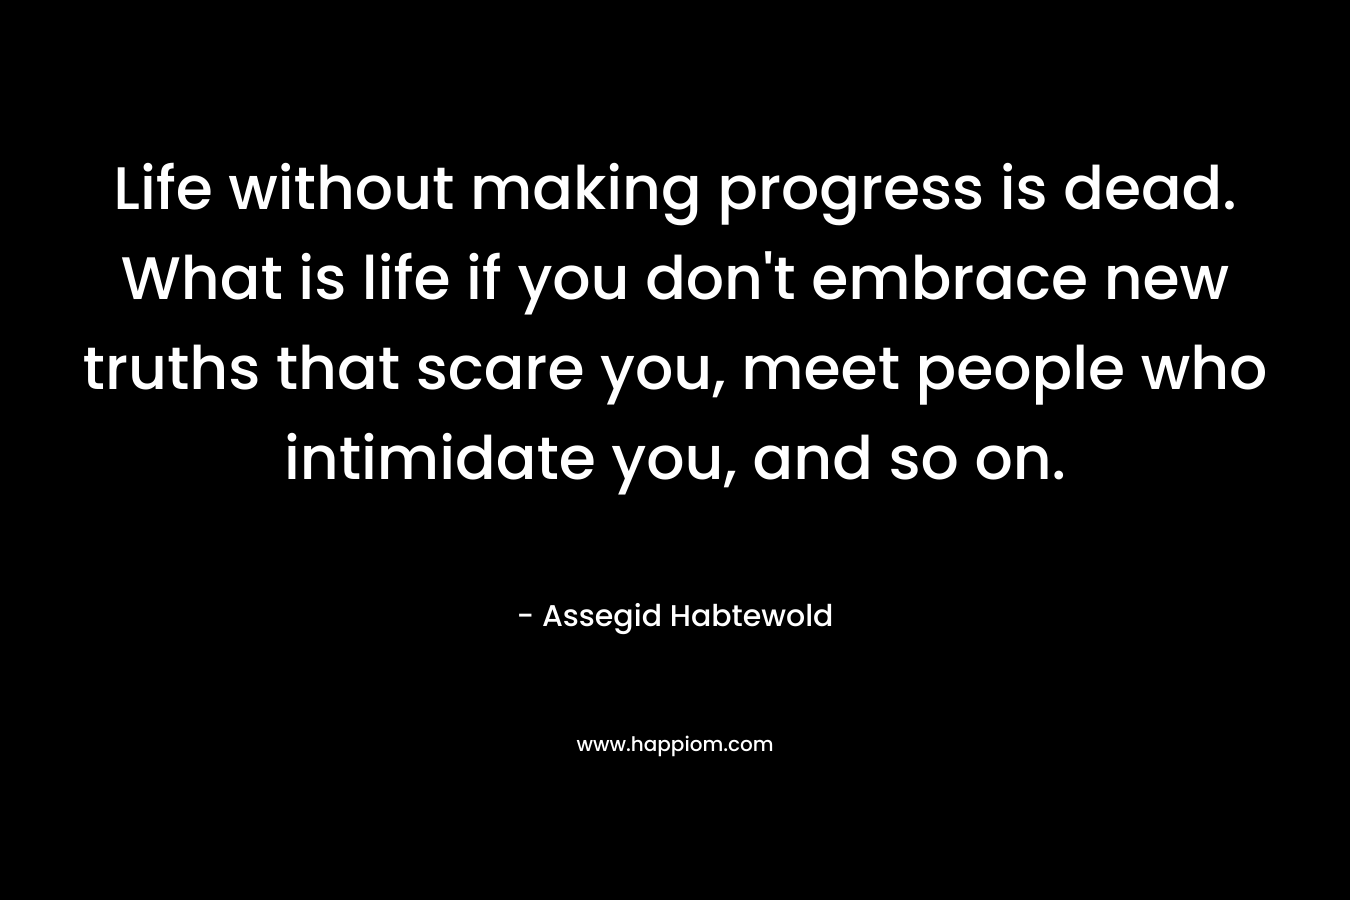 Life without making progress is dead. What is life if you don’t embrace new truths that scare you, meet people who intimidate you, and so on. – Assegid Habtewold